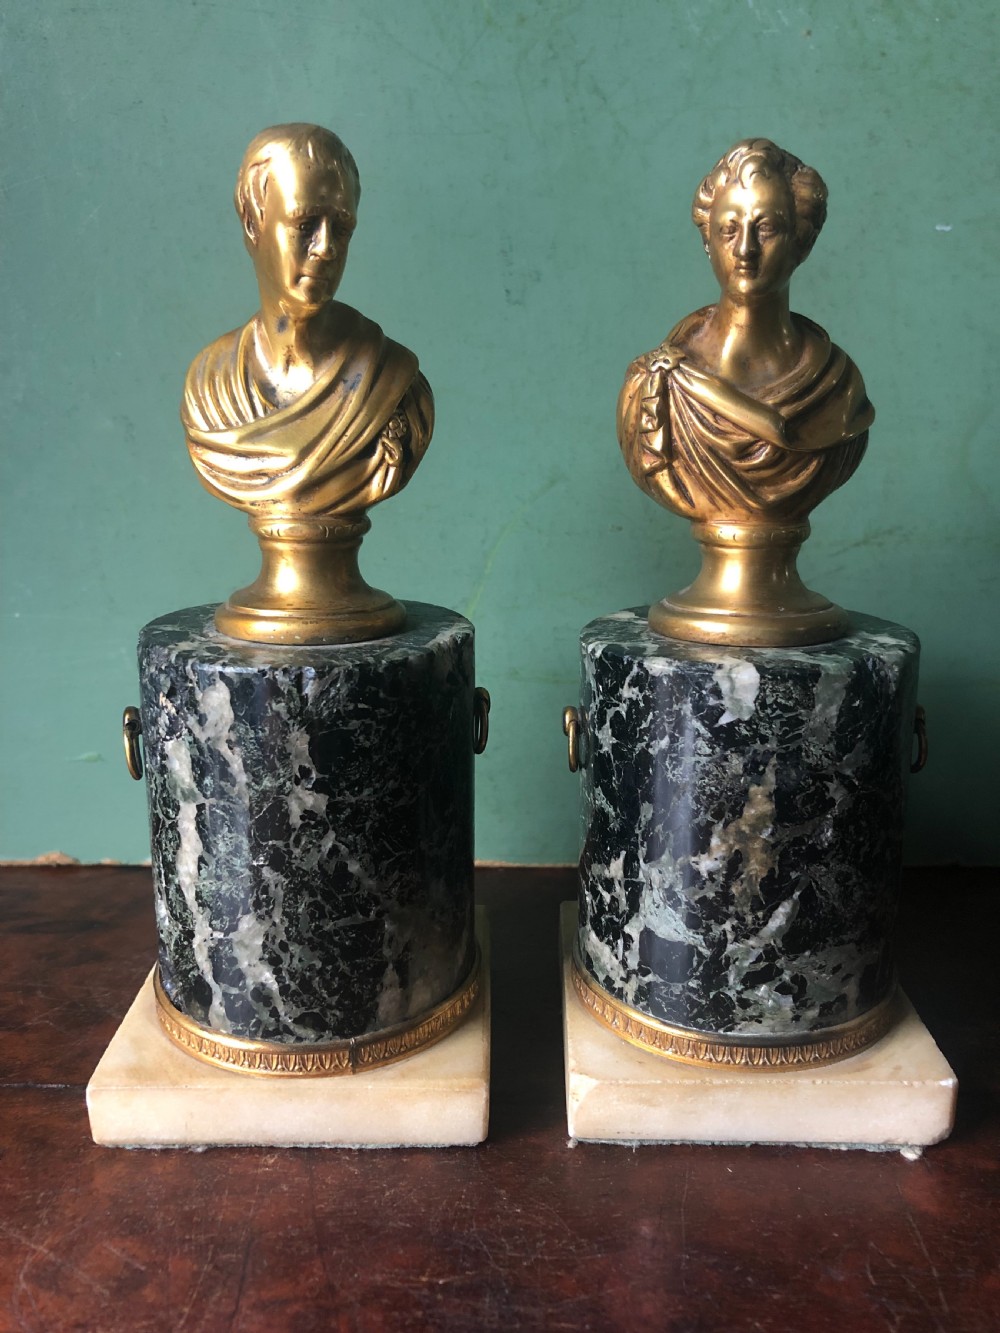 pair of early c19th regency period gilt bronze bust studies of sir walter scott and robert burns on marble bases